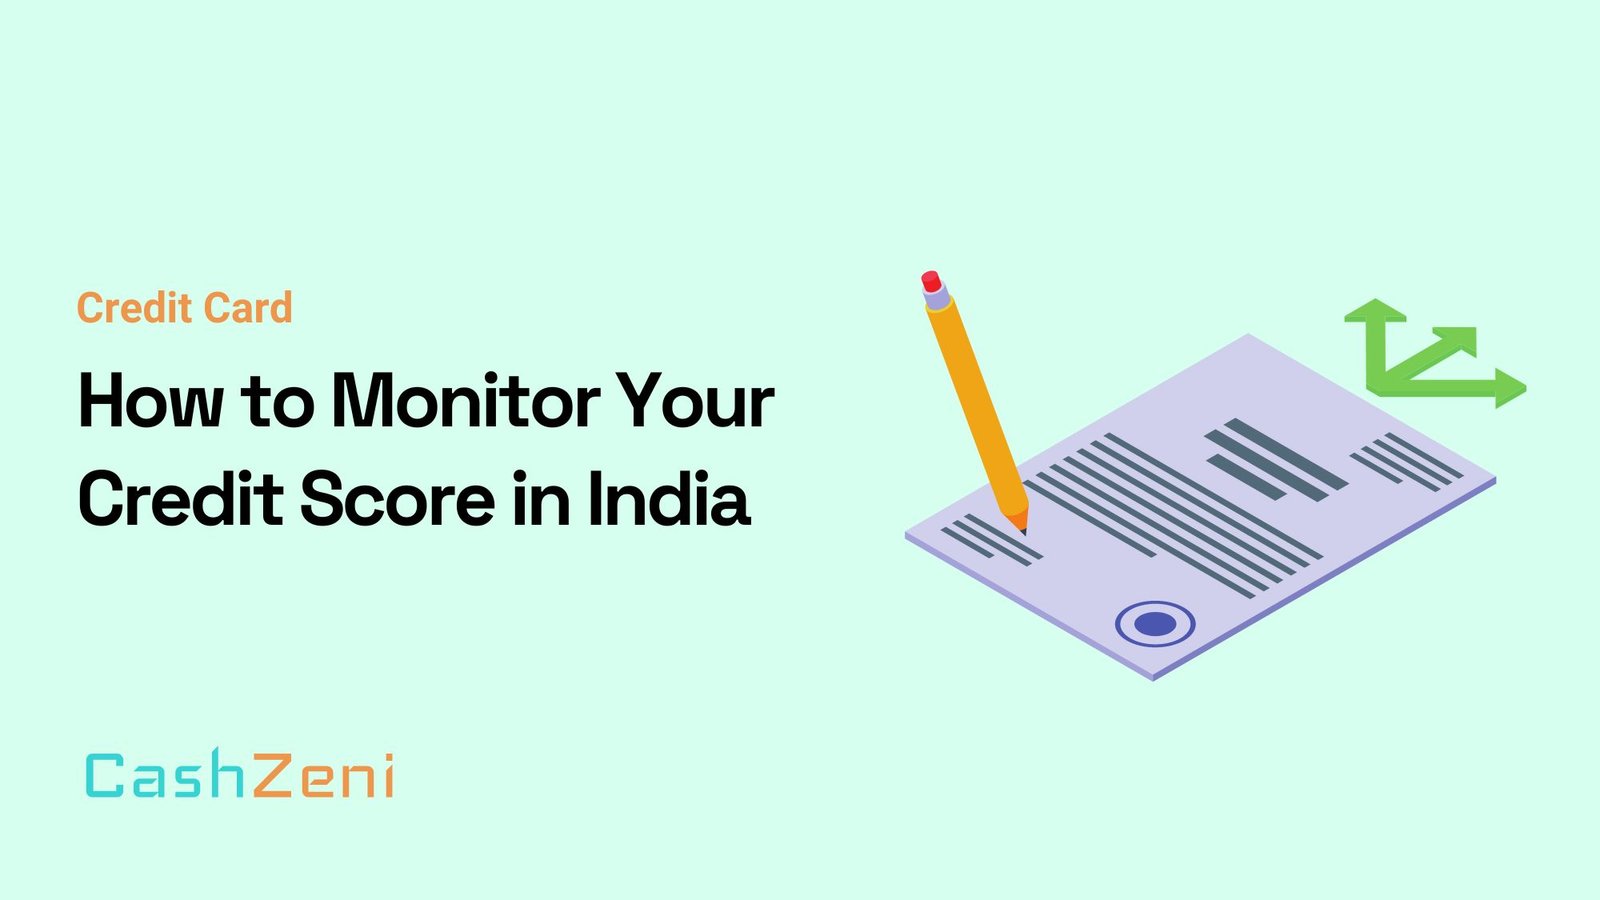 How to Monitor Your Credit Score in India